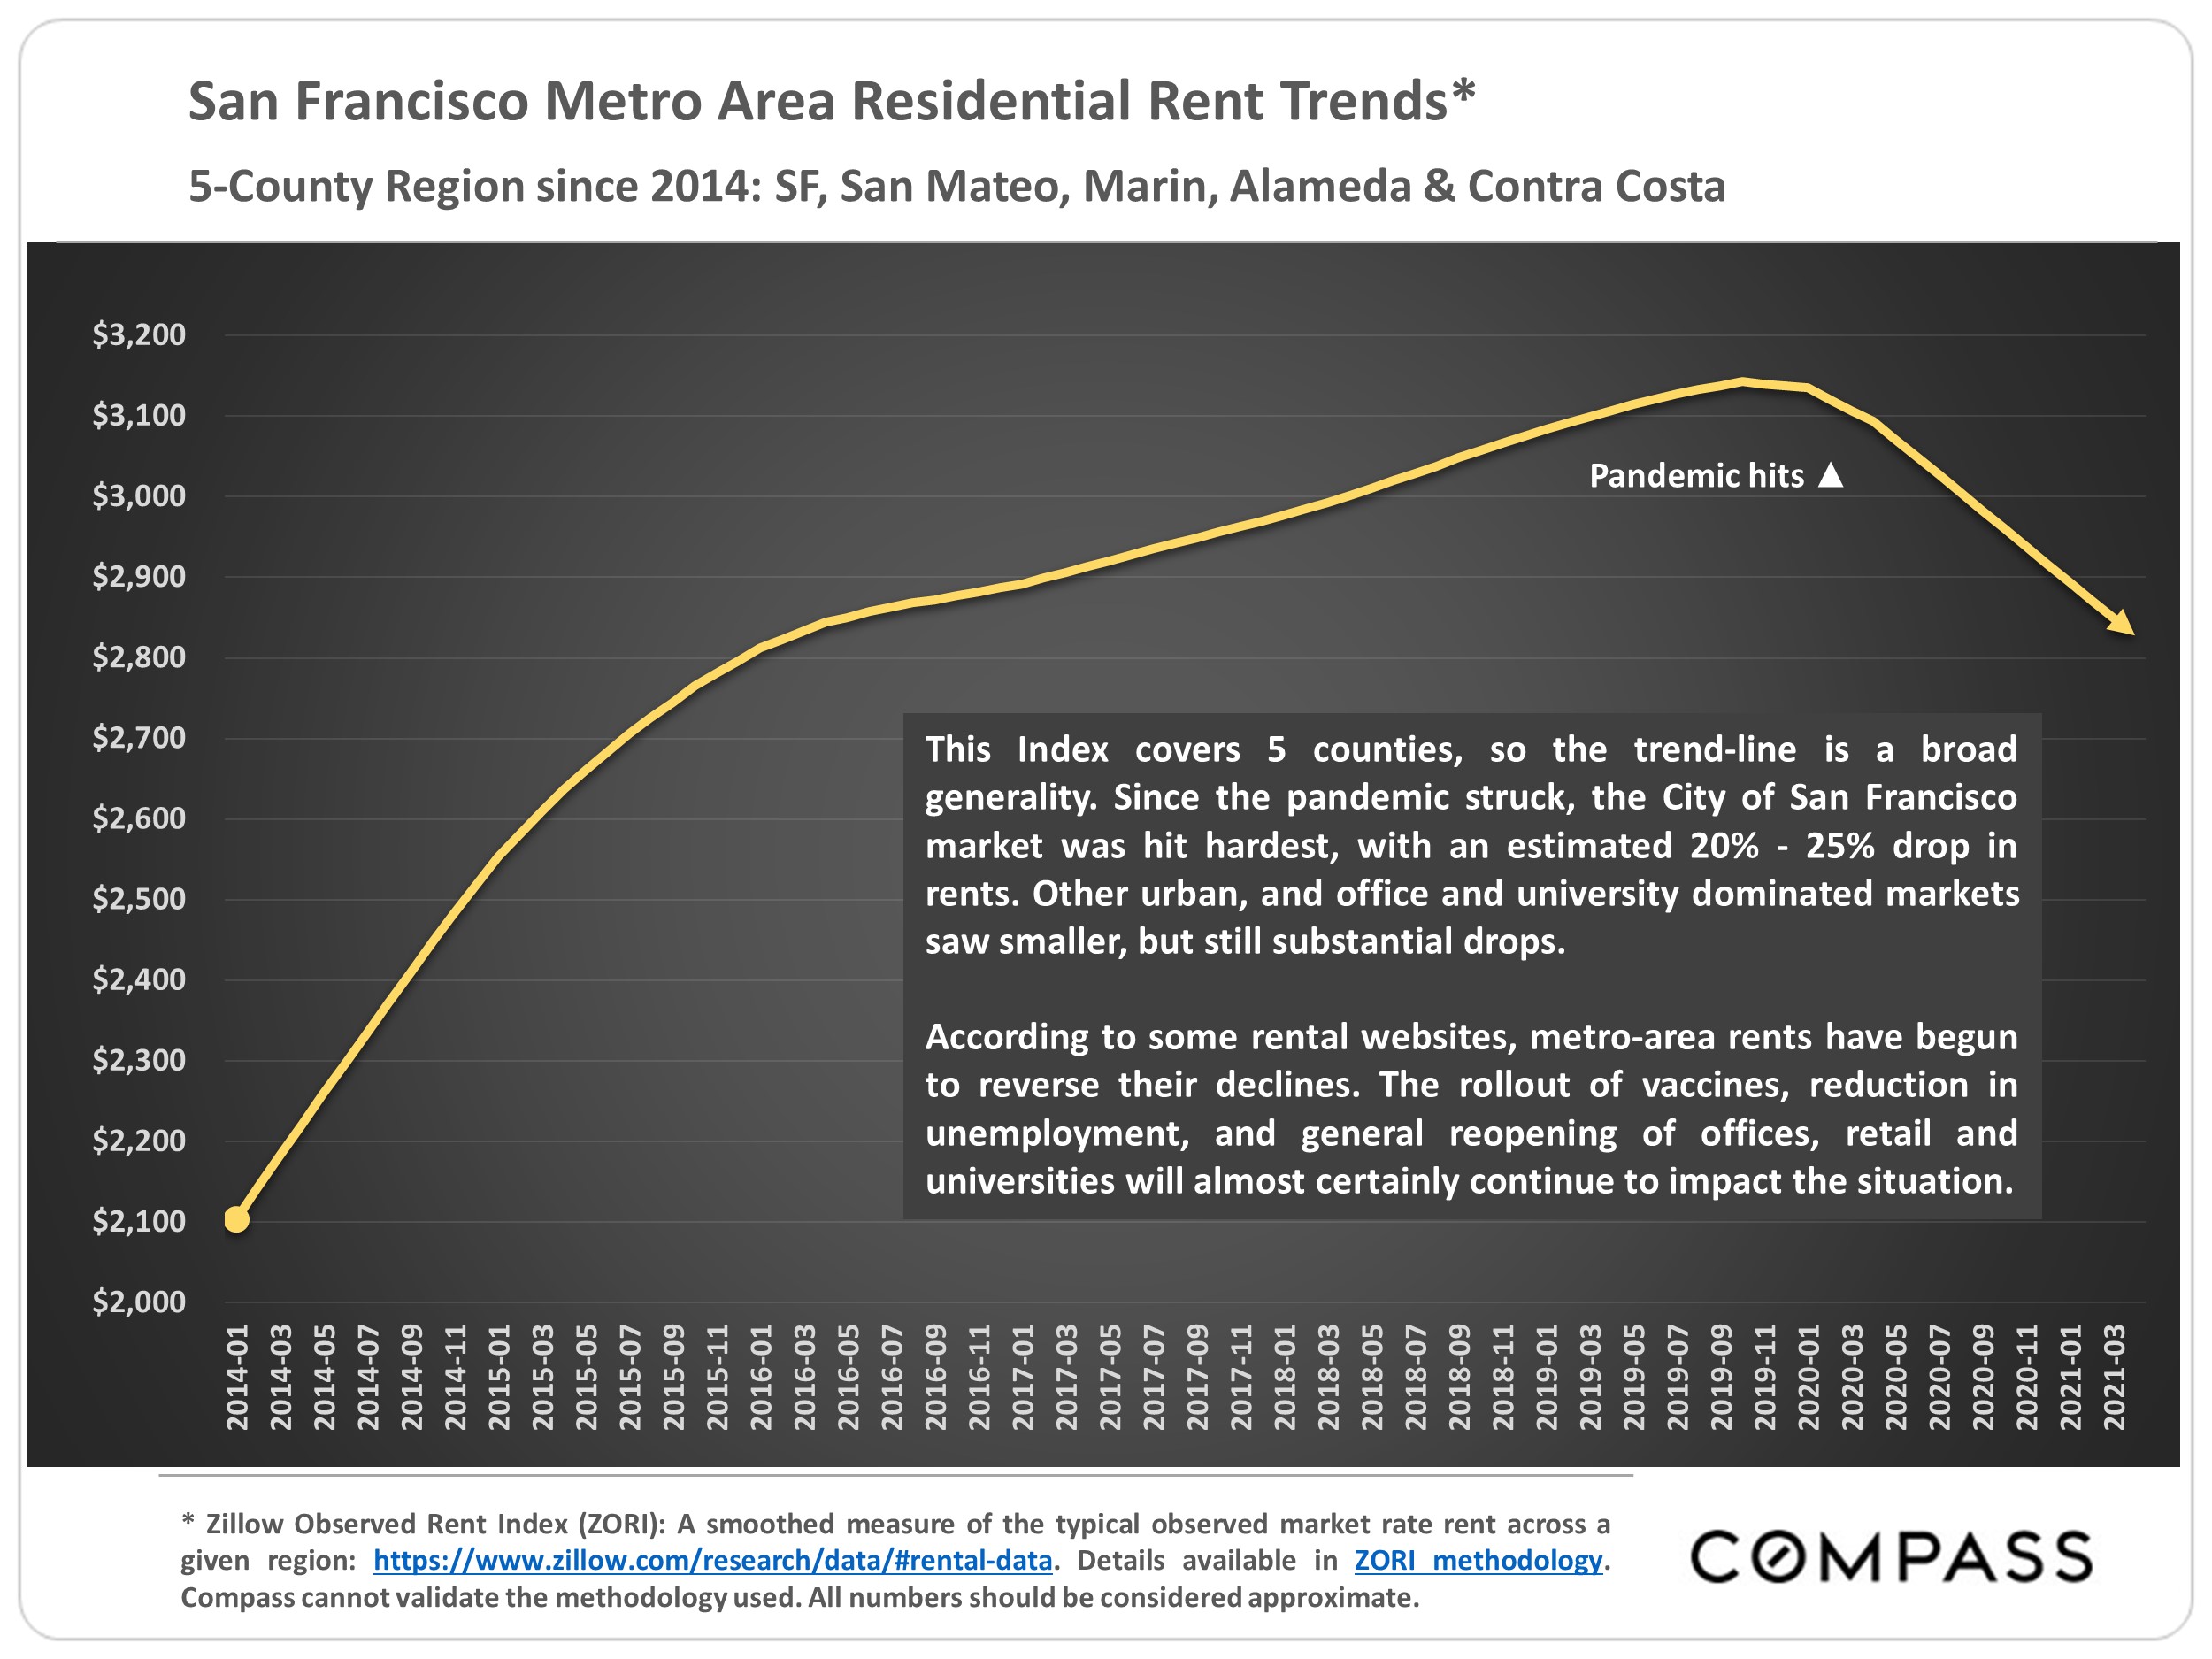 Chart showingSan Francisco Metro Area Residential Rent Trends, 5-County Region since 2014- SF, San Mateo, Marin, Alameda & Contra Costa